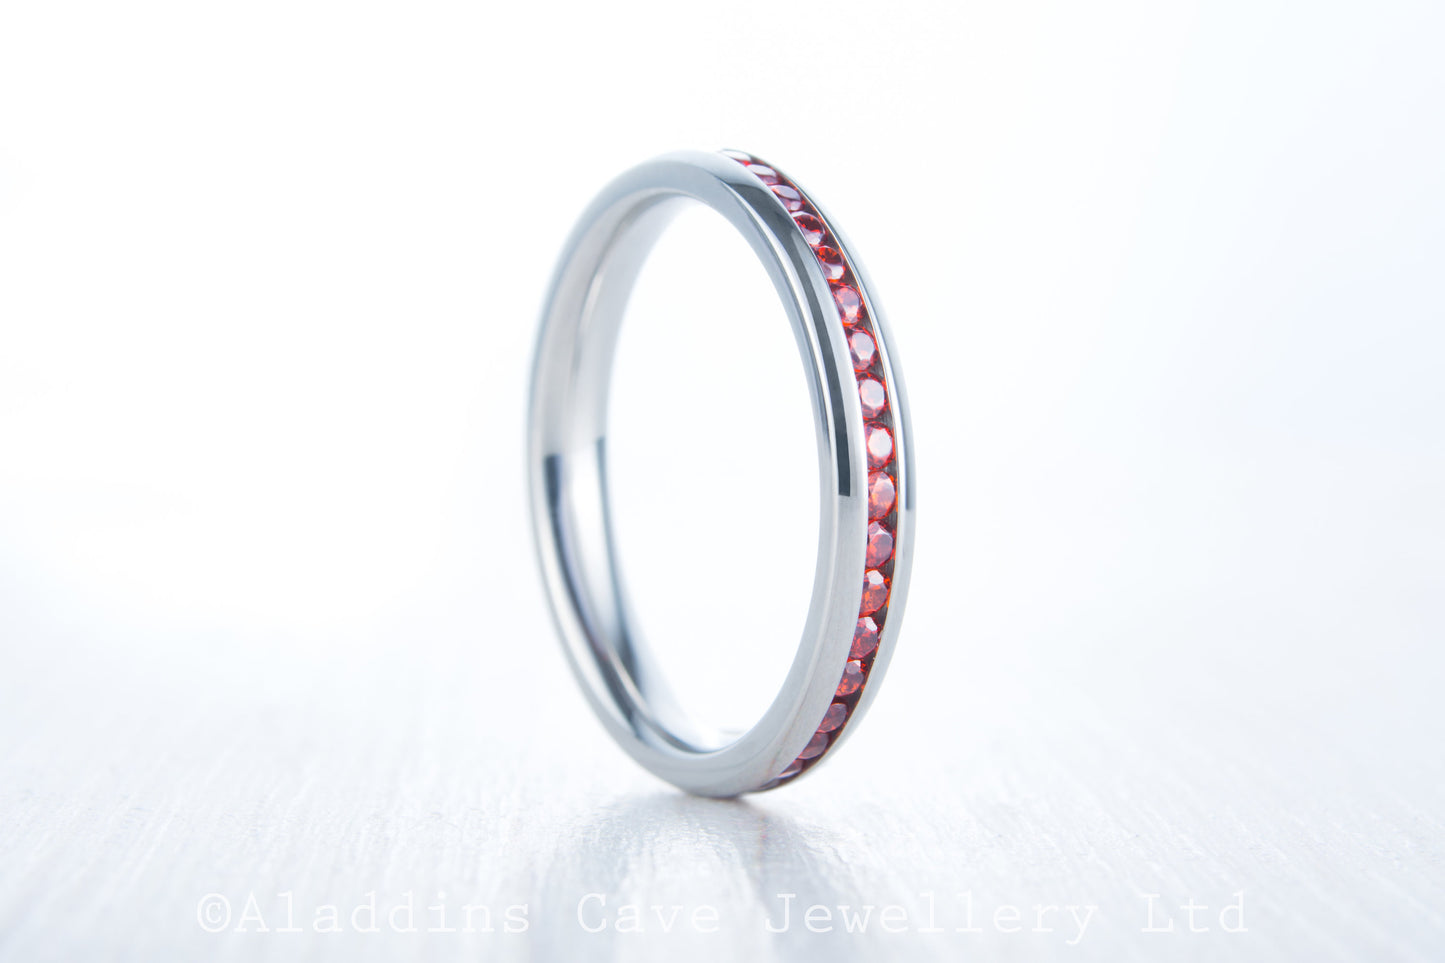 Natural Garnet 3mm Wide Full Eternity ring / stacking ring in white gold or titanium - Wedding Band - Engagement ring